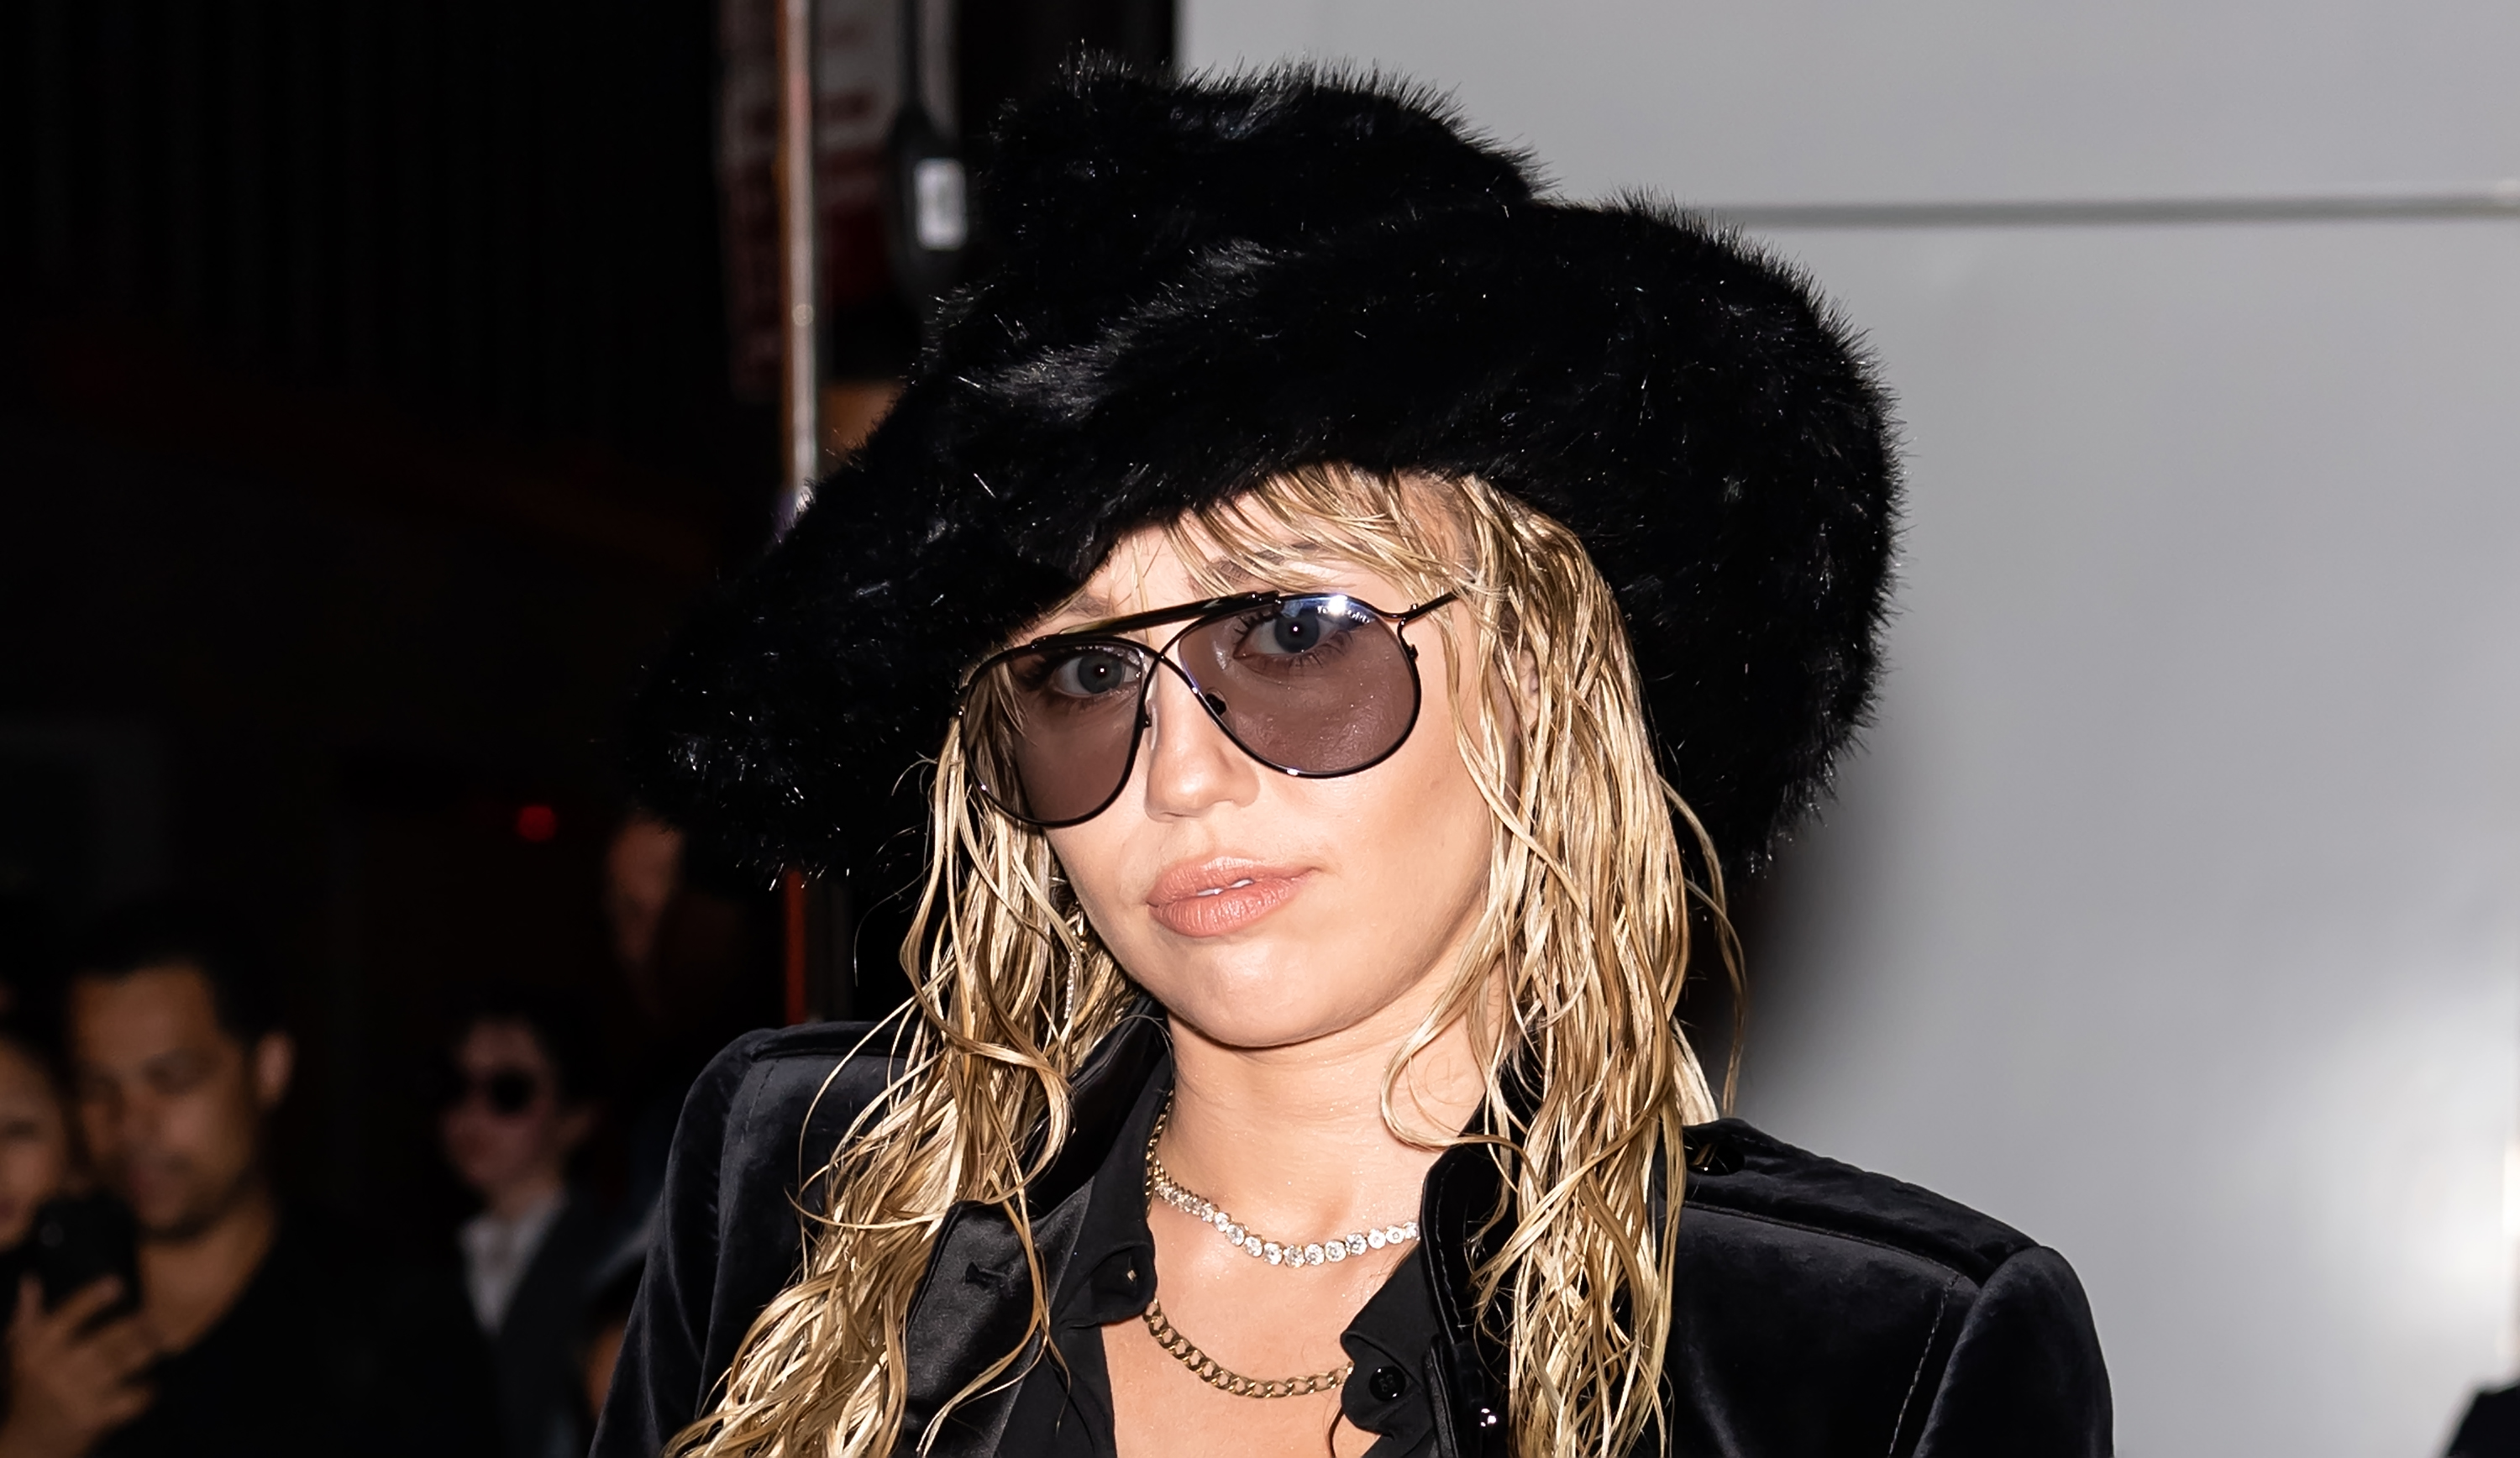 Miley Cyrus wearing a large black hat